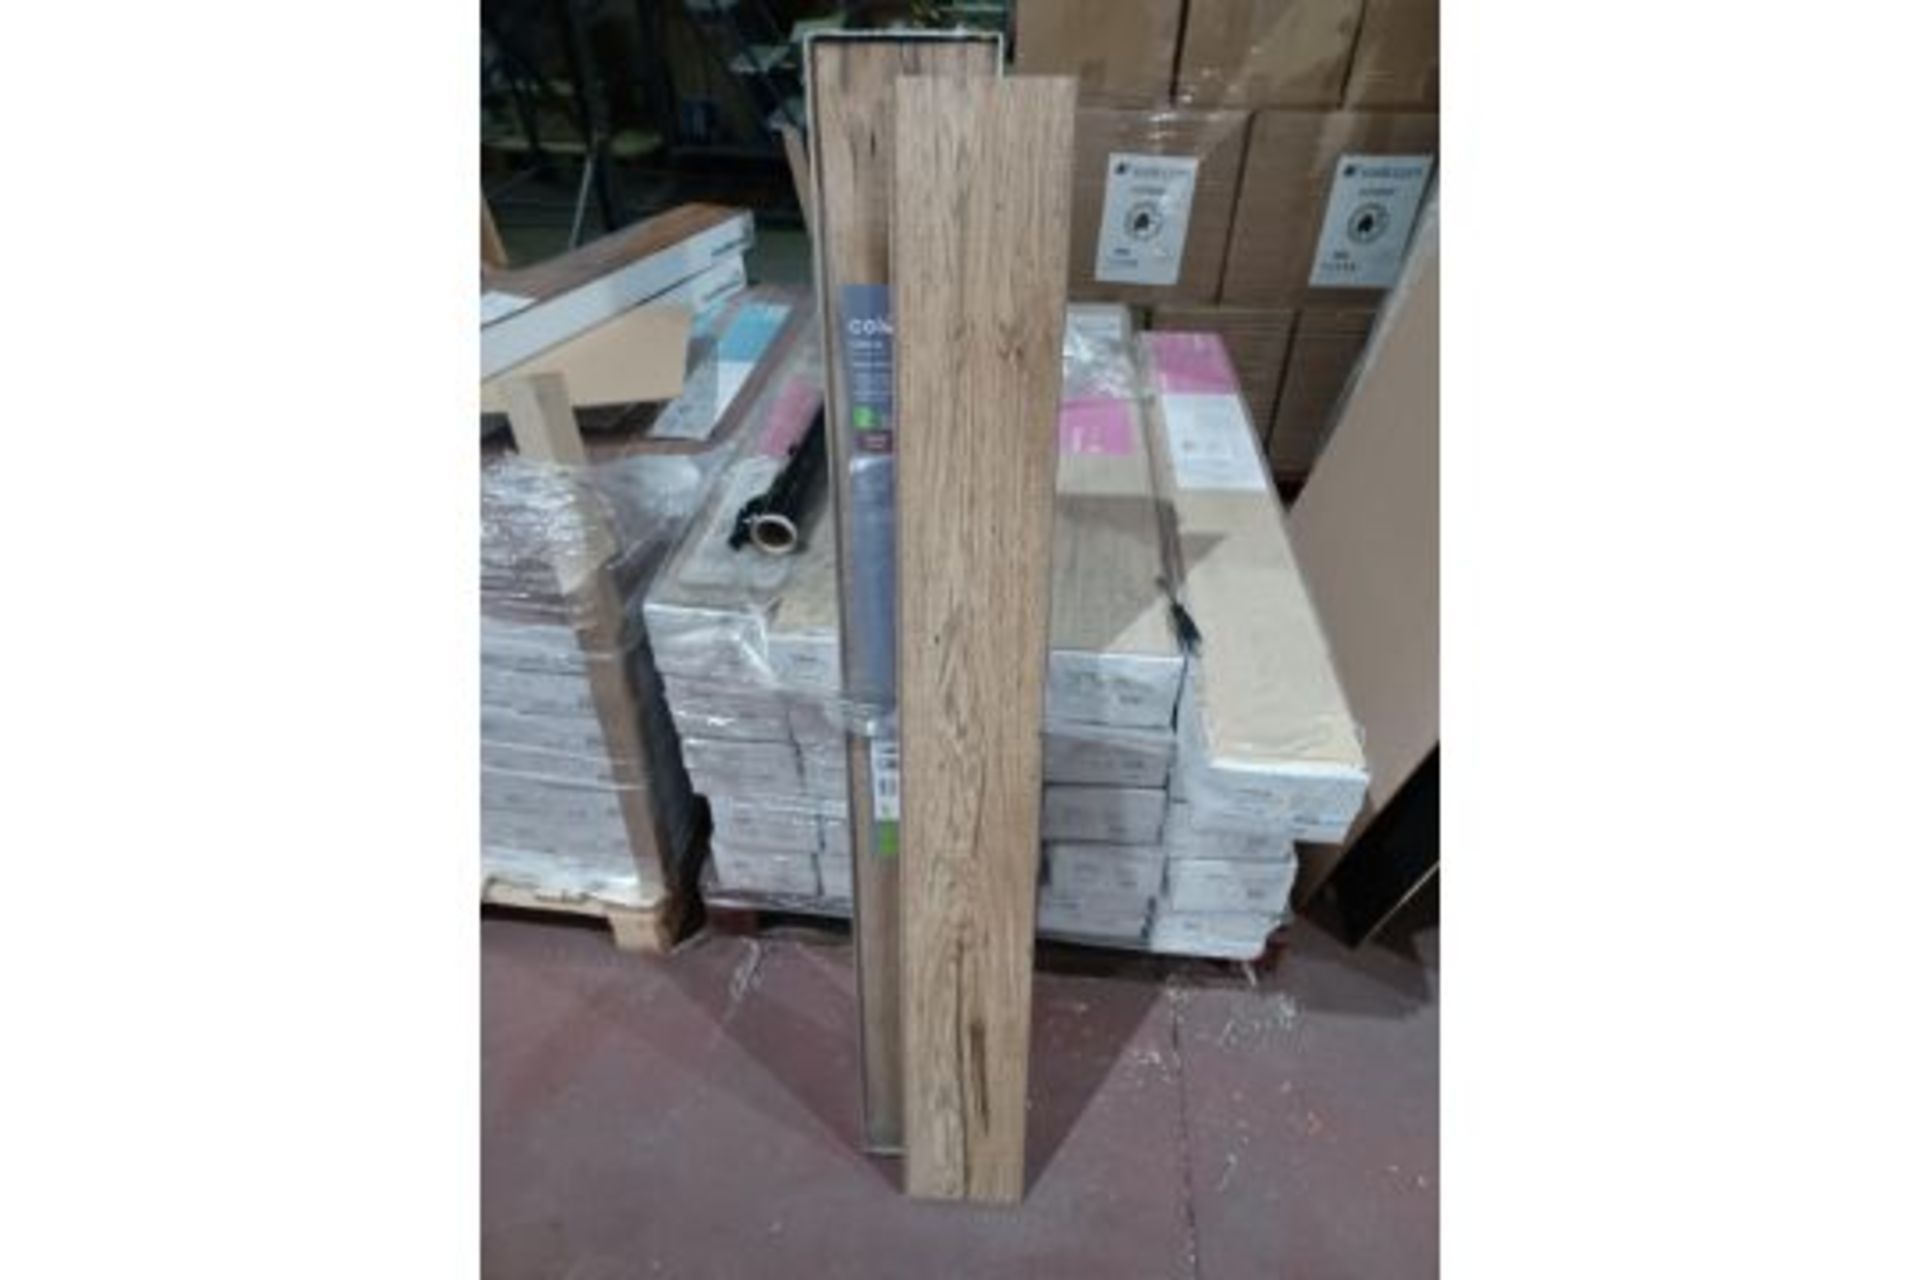 2 X PACKS OF Ostend Natural Oxford oak effect Flooring. EACH PACK CONTAINS 1.76m2, GIVING THIS LOT A